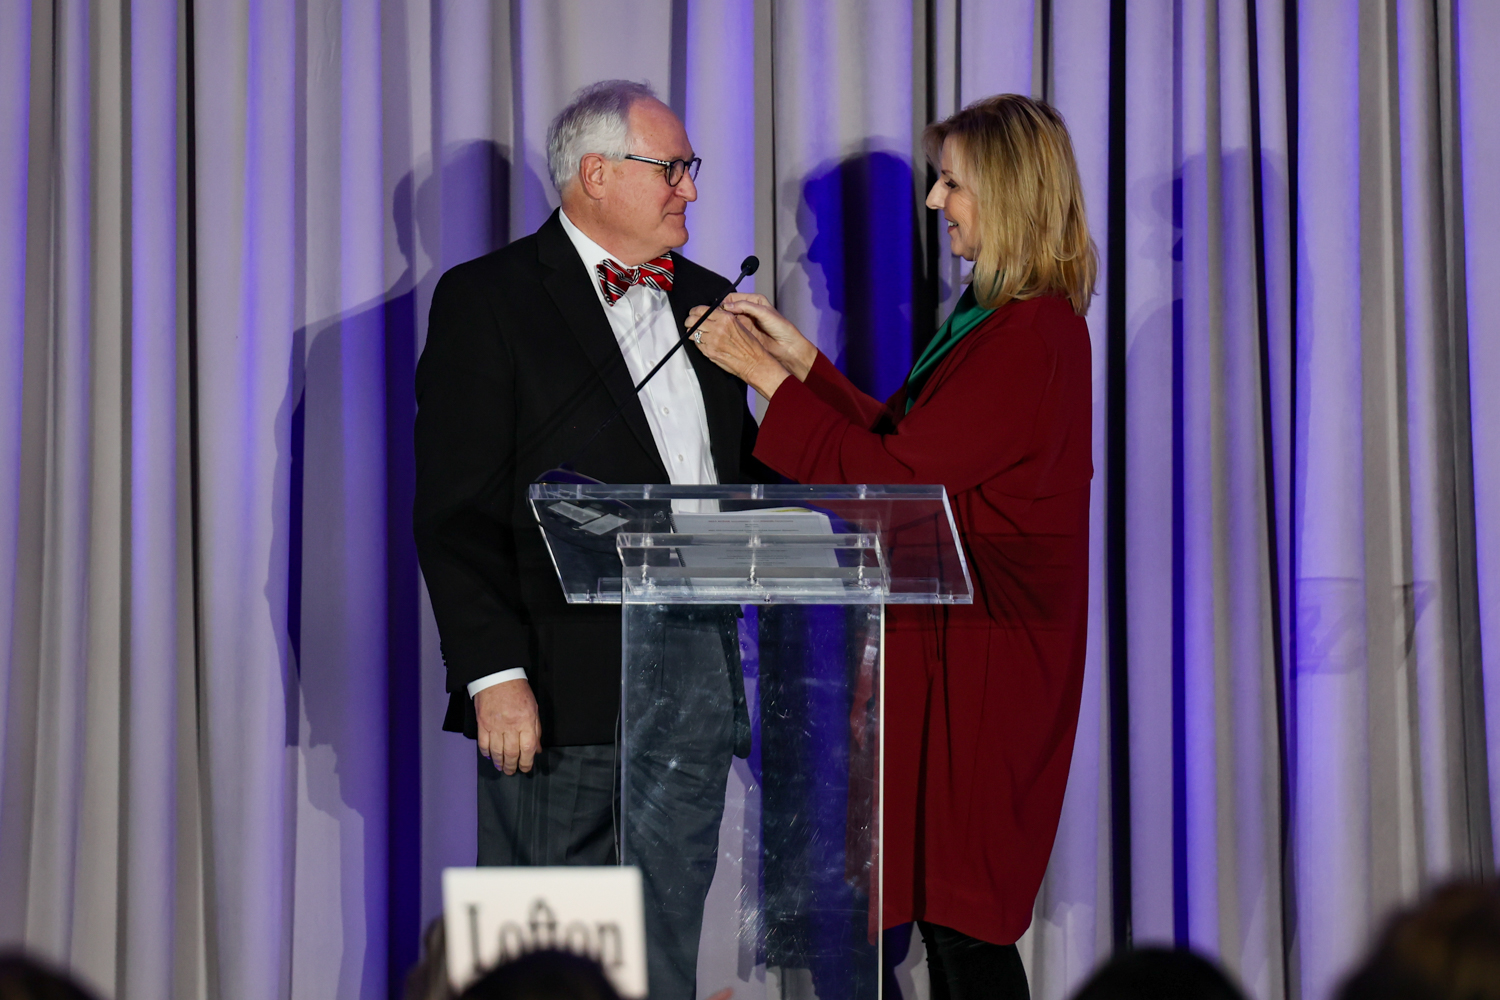 Image Description: 2021 REALTOR® of the Year Steve Moyer accepts his award and pin on stage with Chair of the Awards Committee.